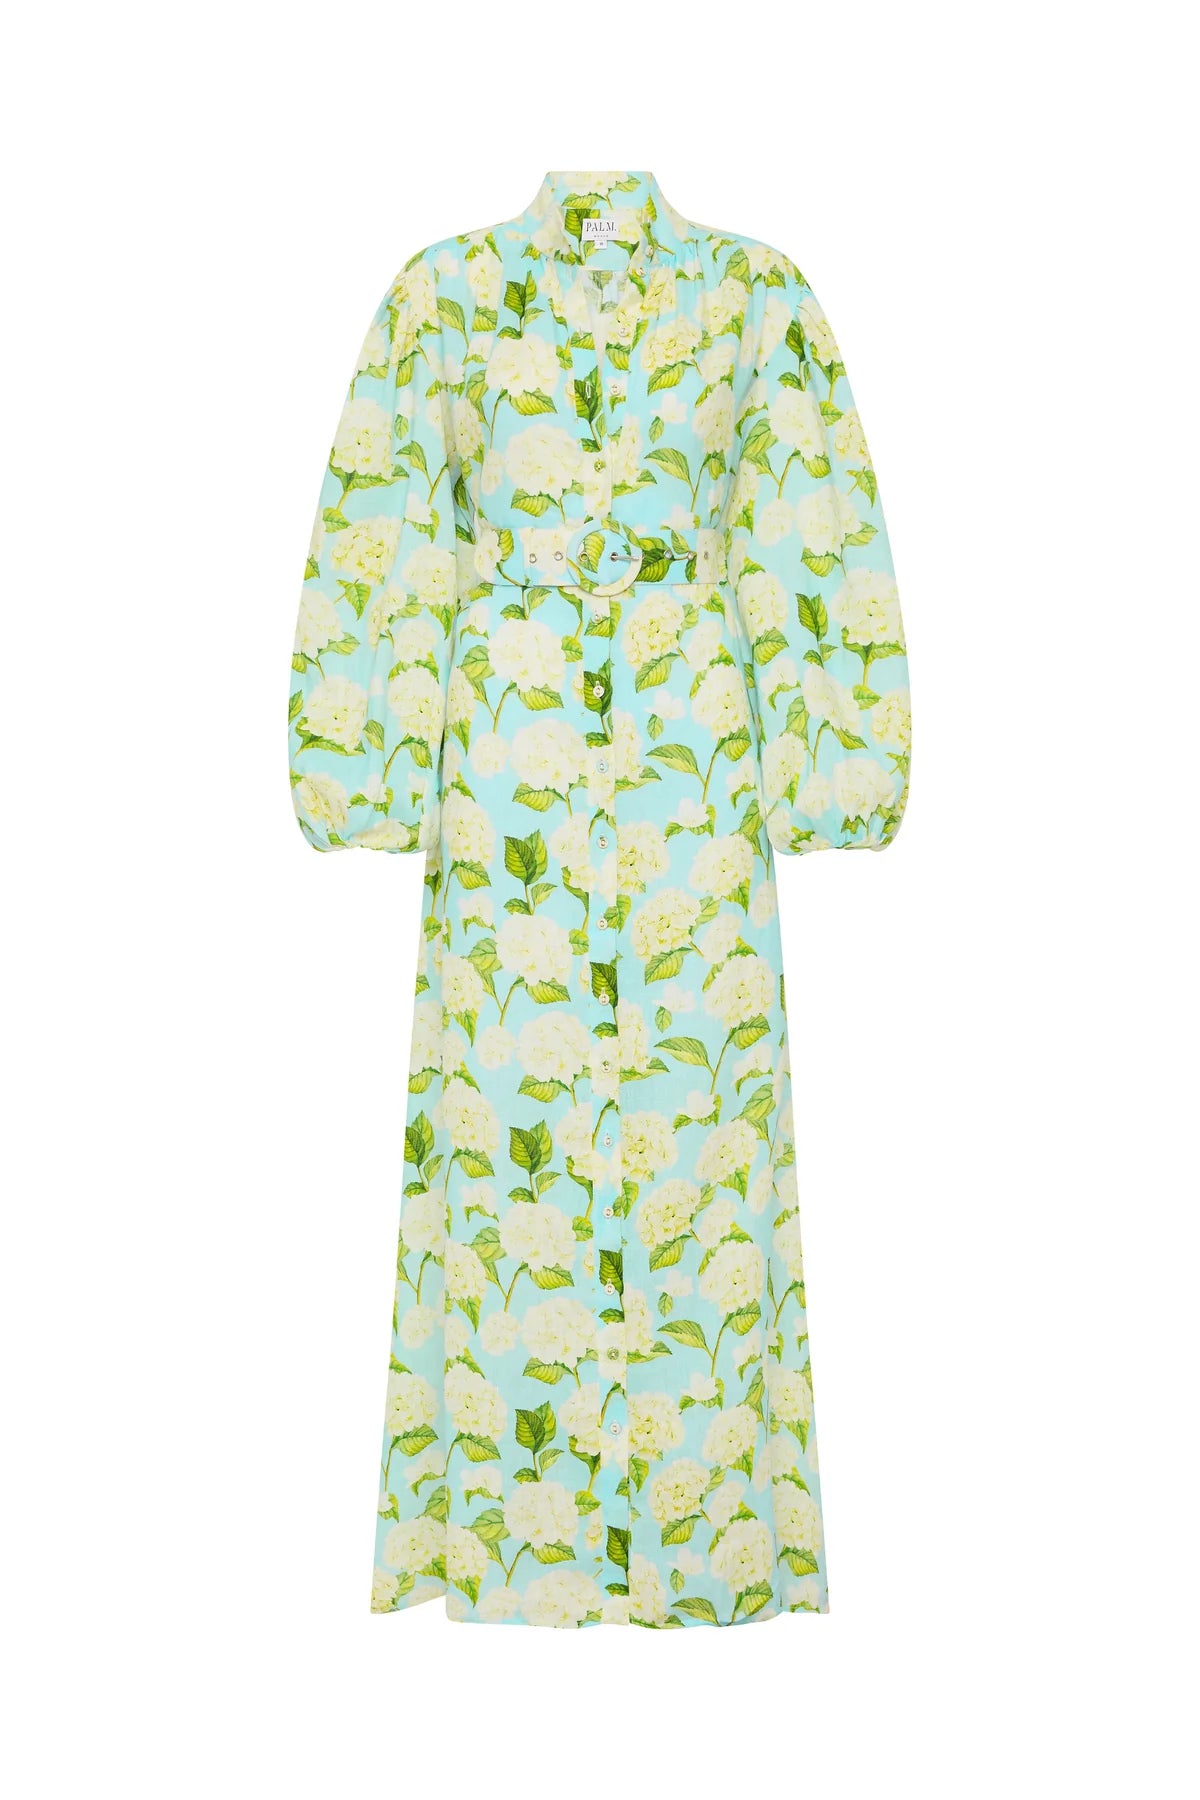 Pale blue dress with white Hydrangea print in a maxi length with long sleeves